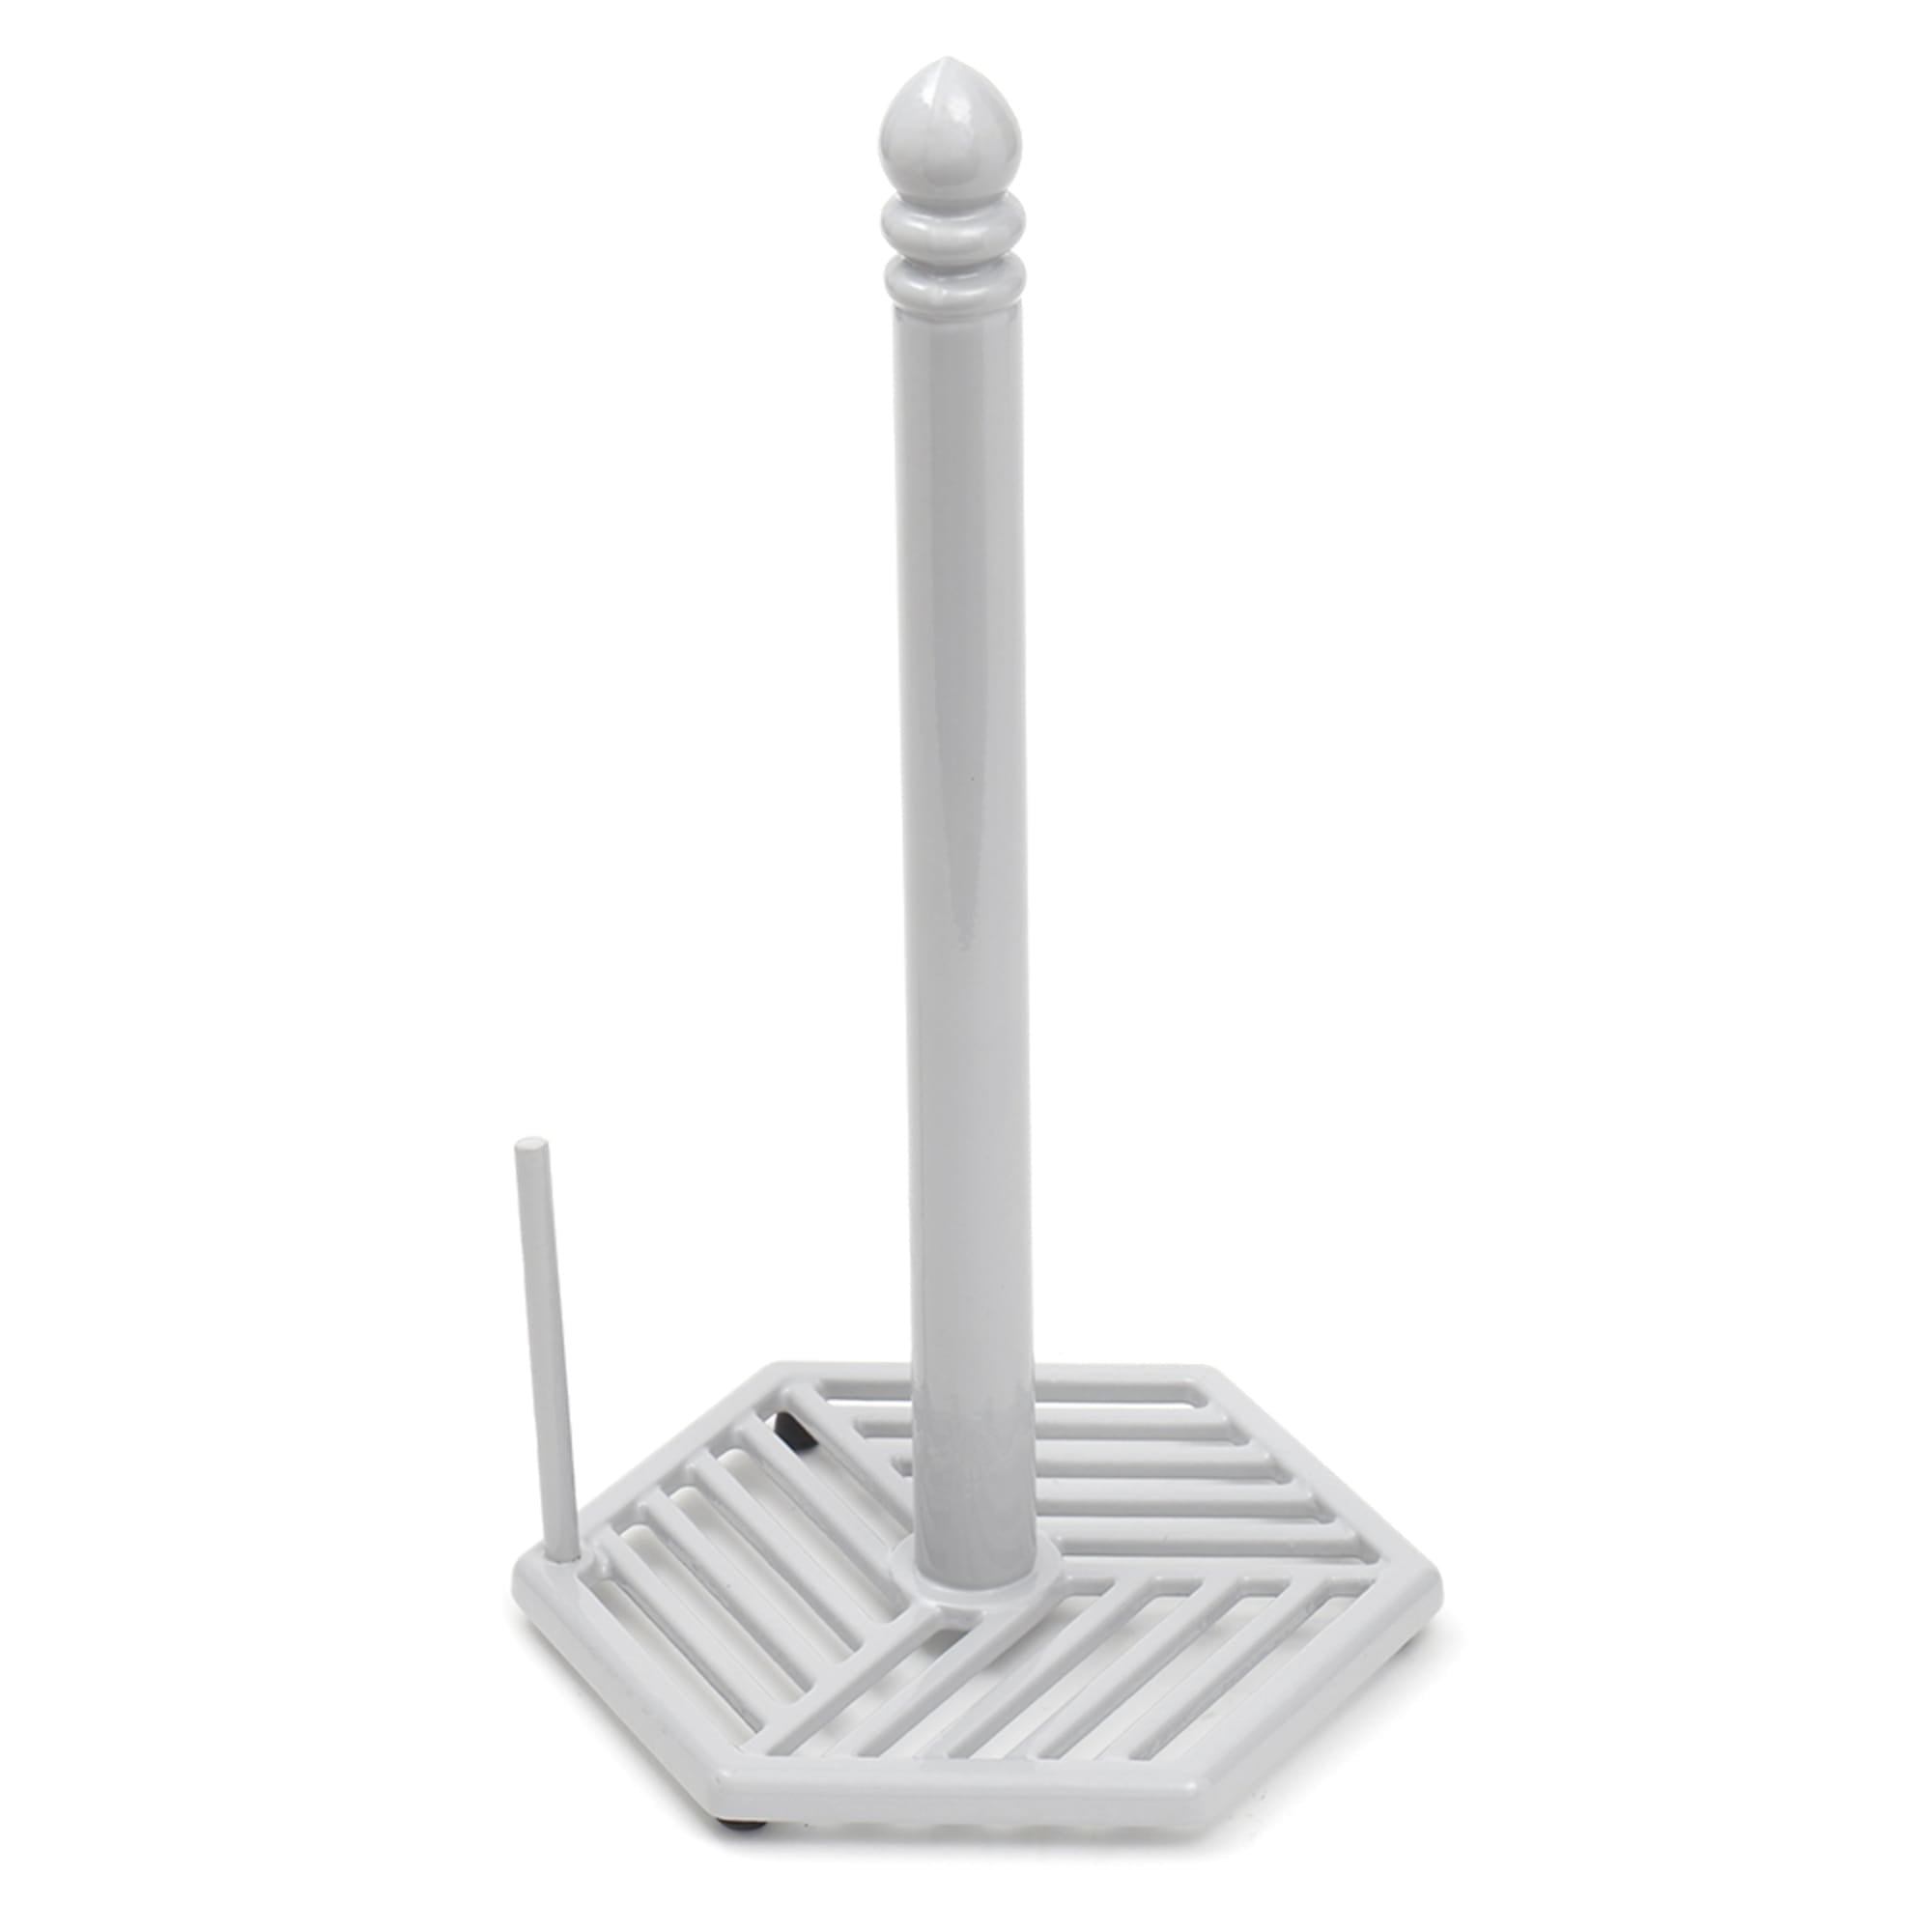 Home Basics Lines Freestanding Cast Iron Paper Towel Holder with Dispensing Side Bar, Grey $10.00 EACH, CASE PACK OF 3